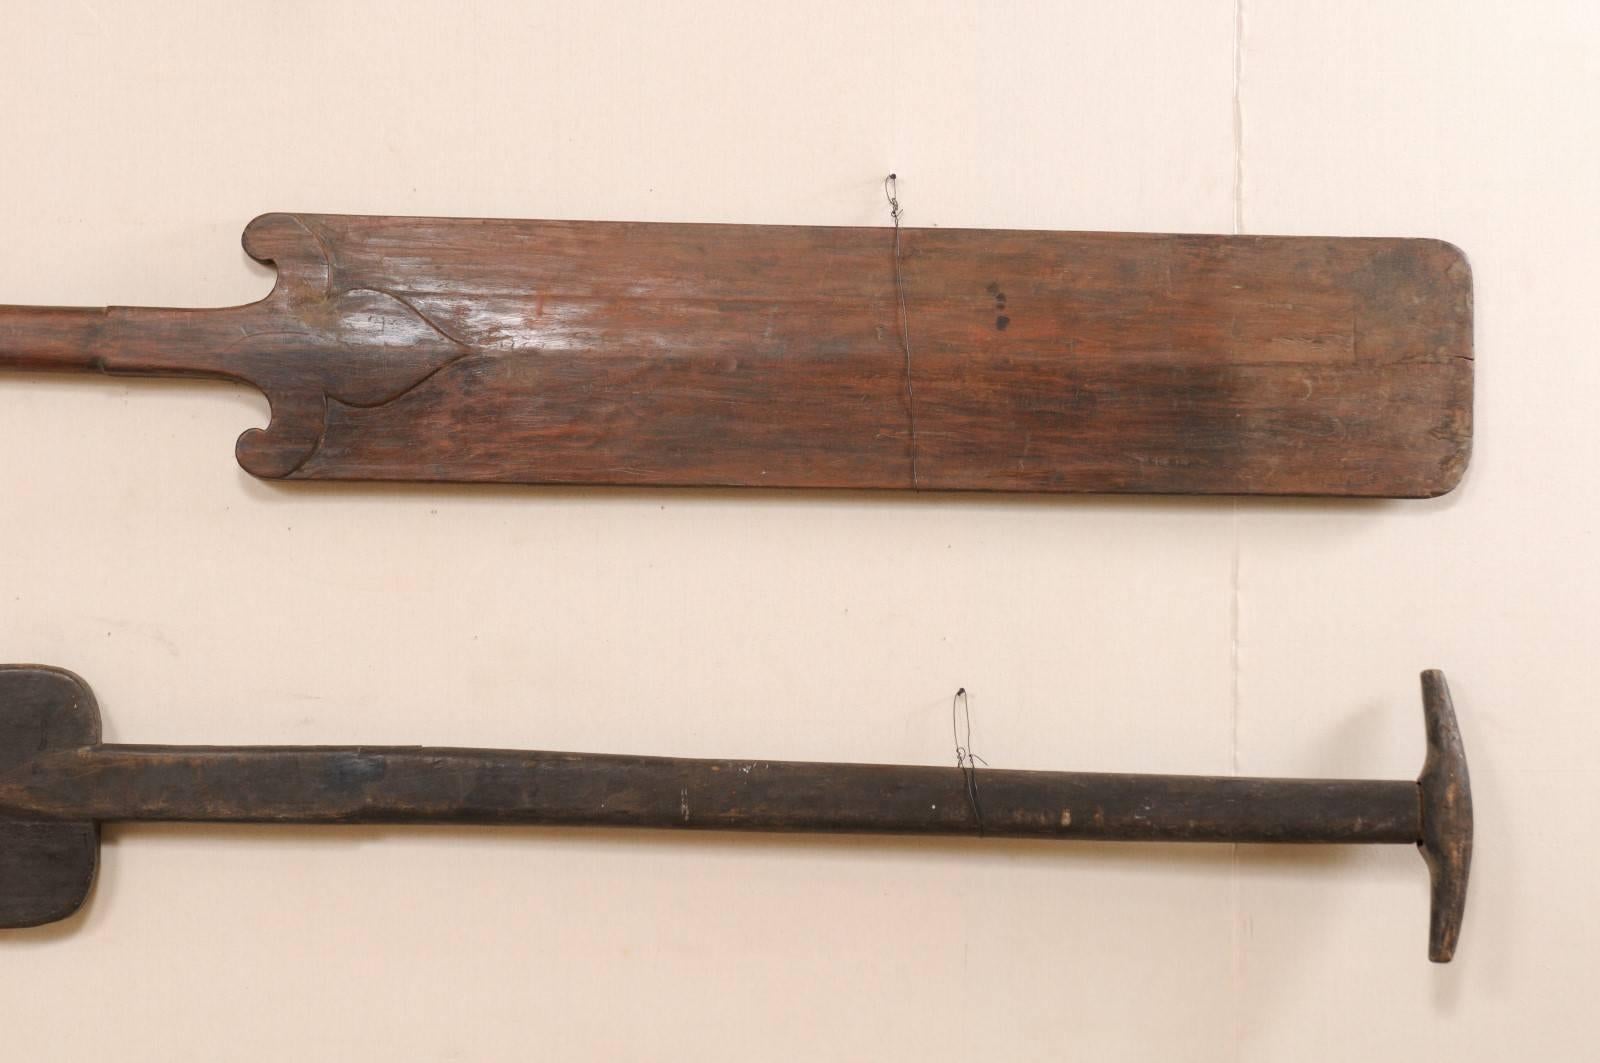 Carved Pair Mid-20th C. Boat Steering Paddles from Kerala, South India (11+ Ft Long!) For Sale